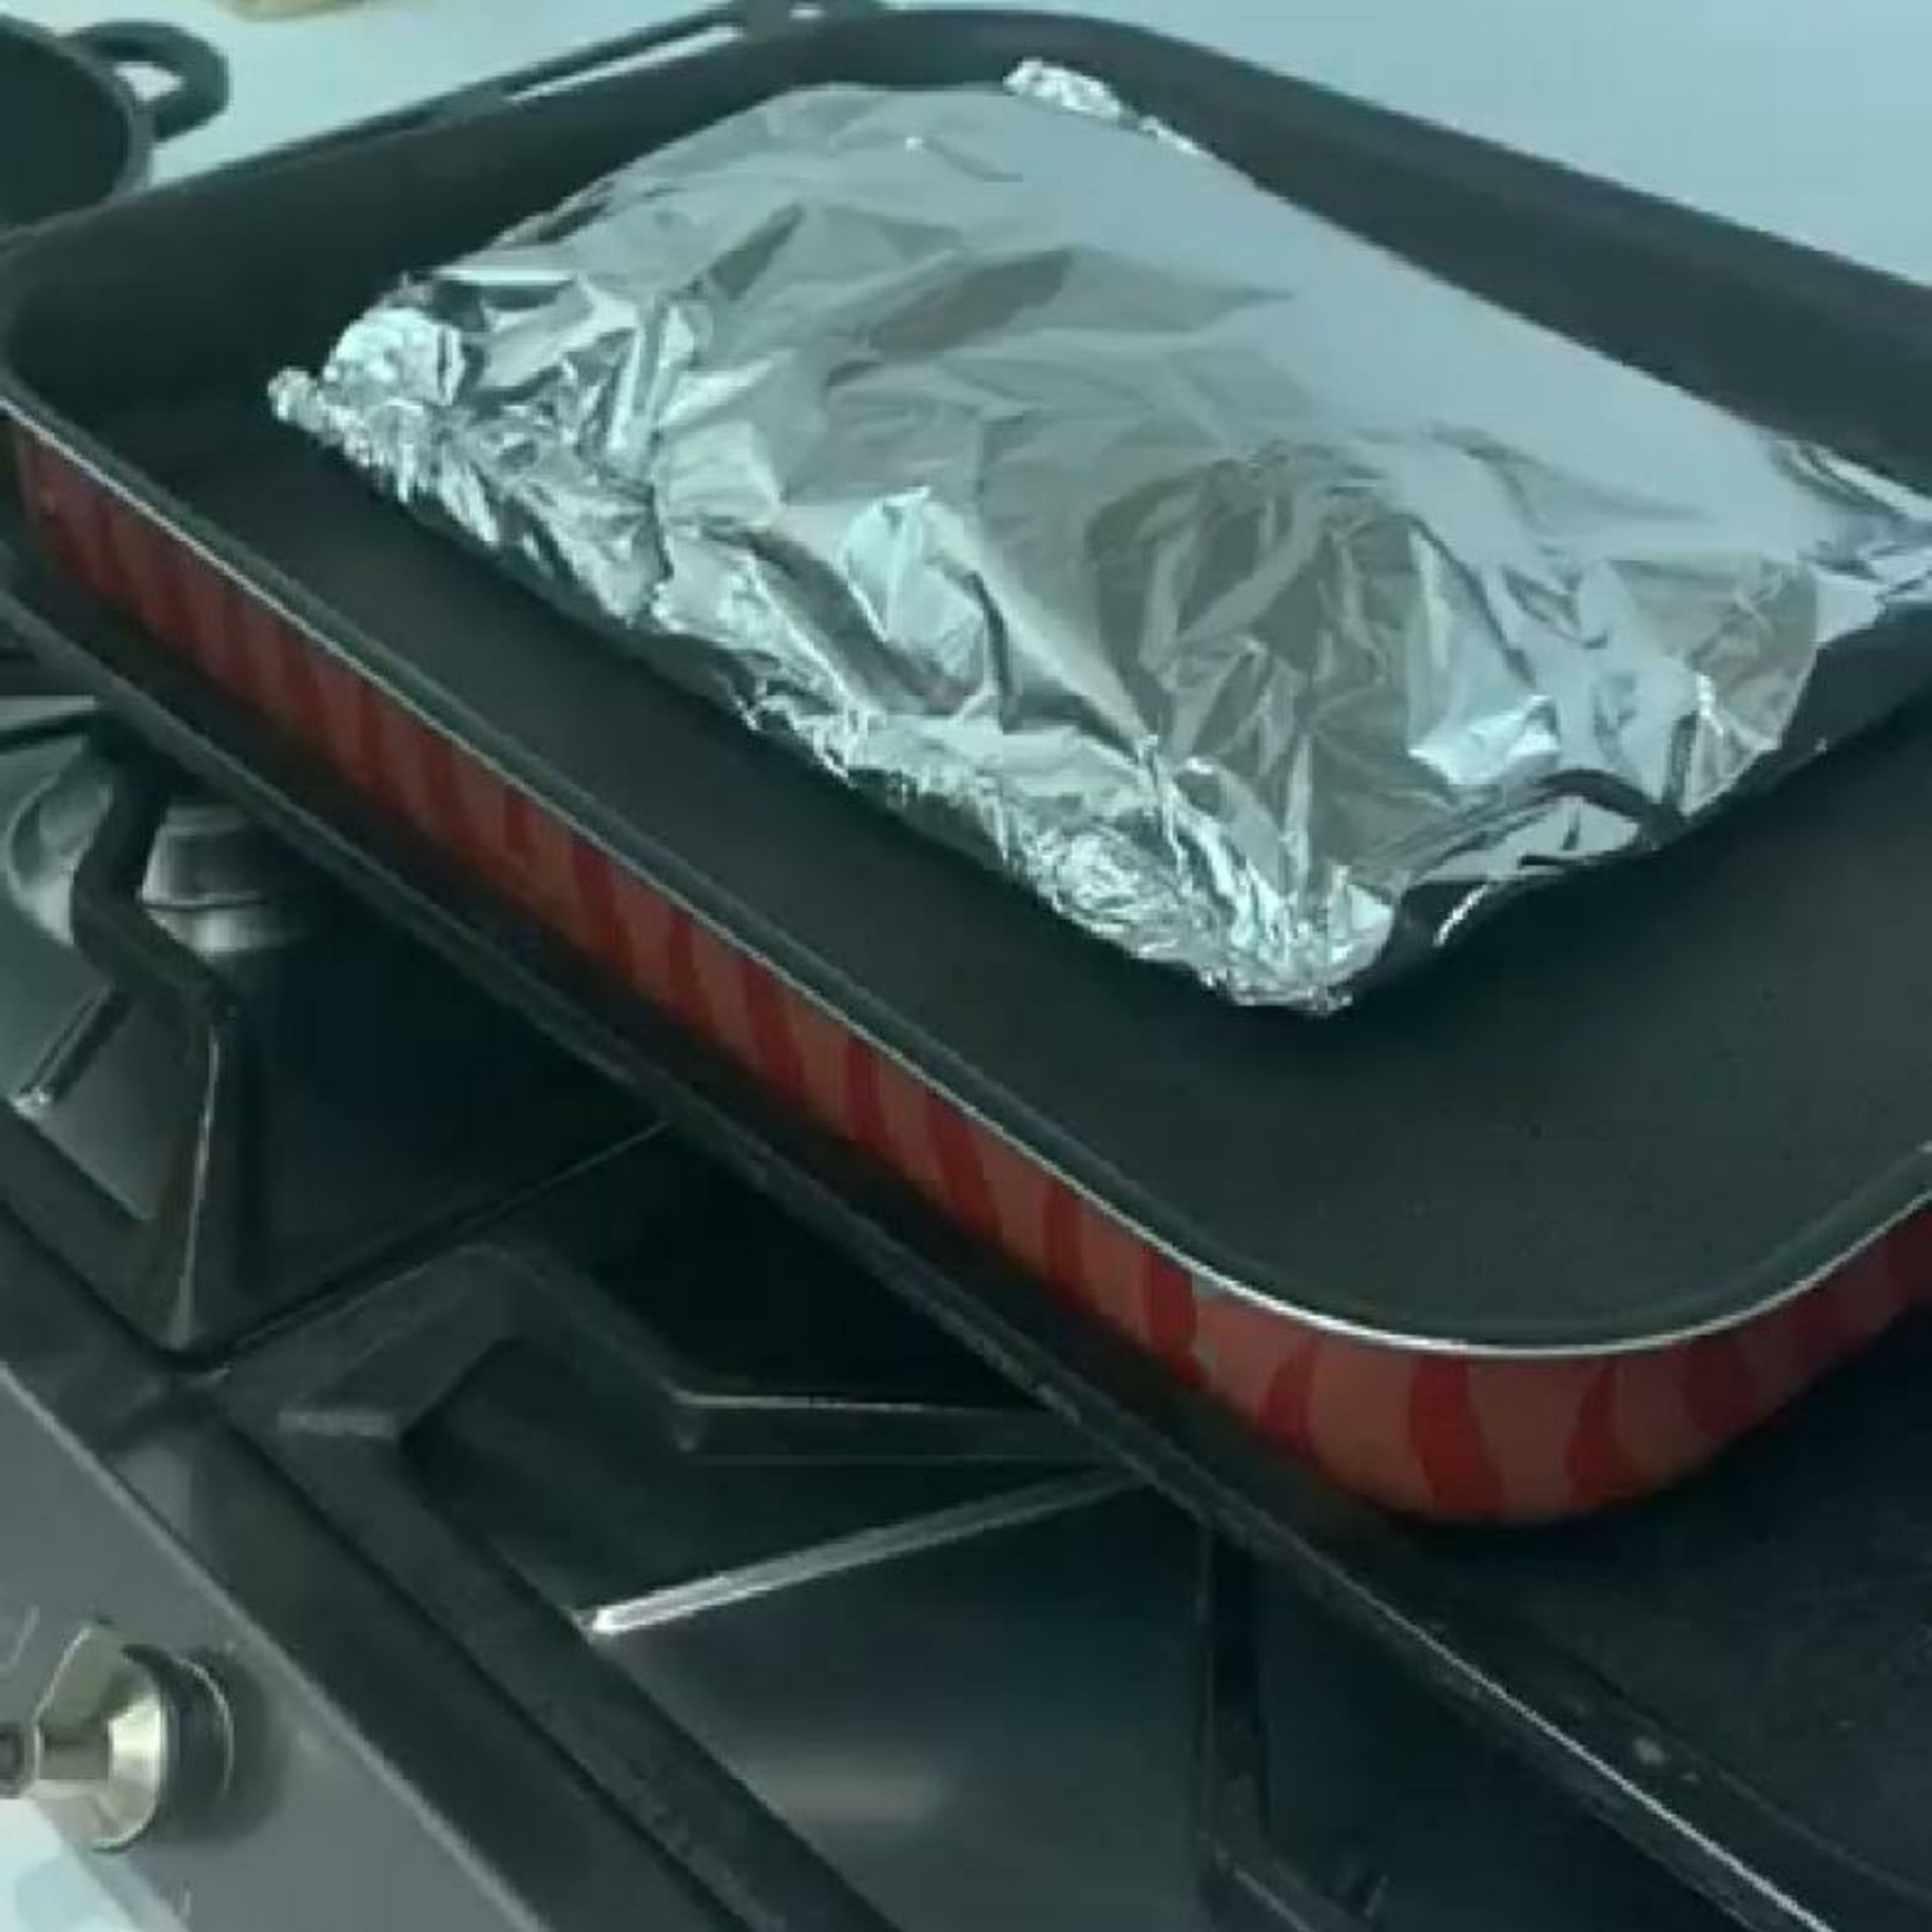 cover the steak well inside the baking sheet and staple the sheet around to seal it then cover with aluminum foil. Bakeiin the over on 150 deg c for 45 mins.